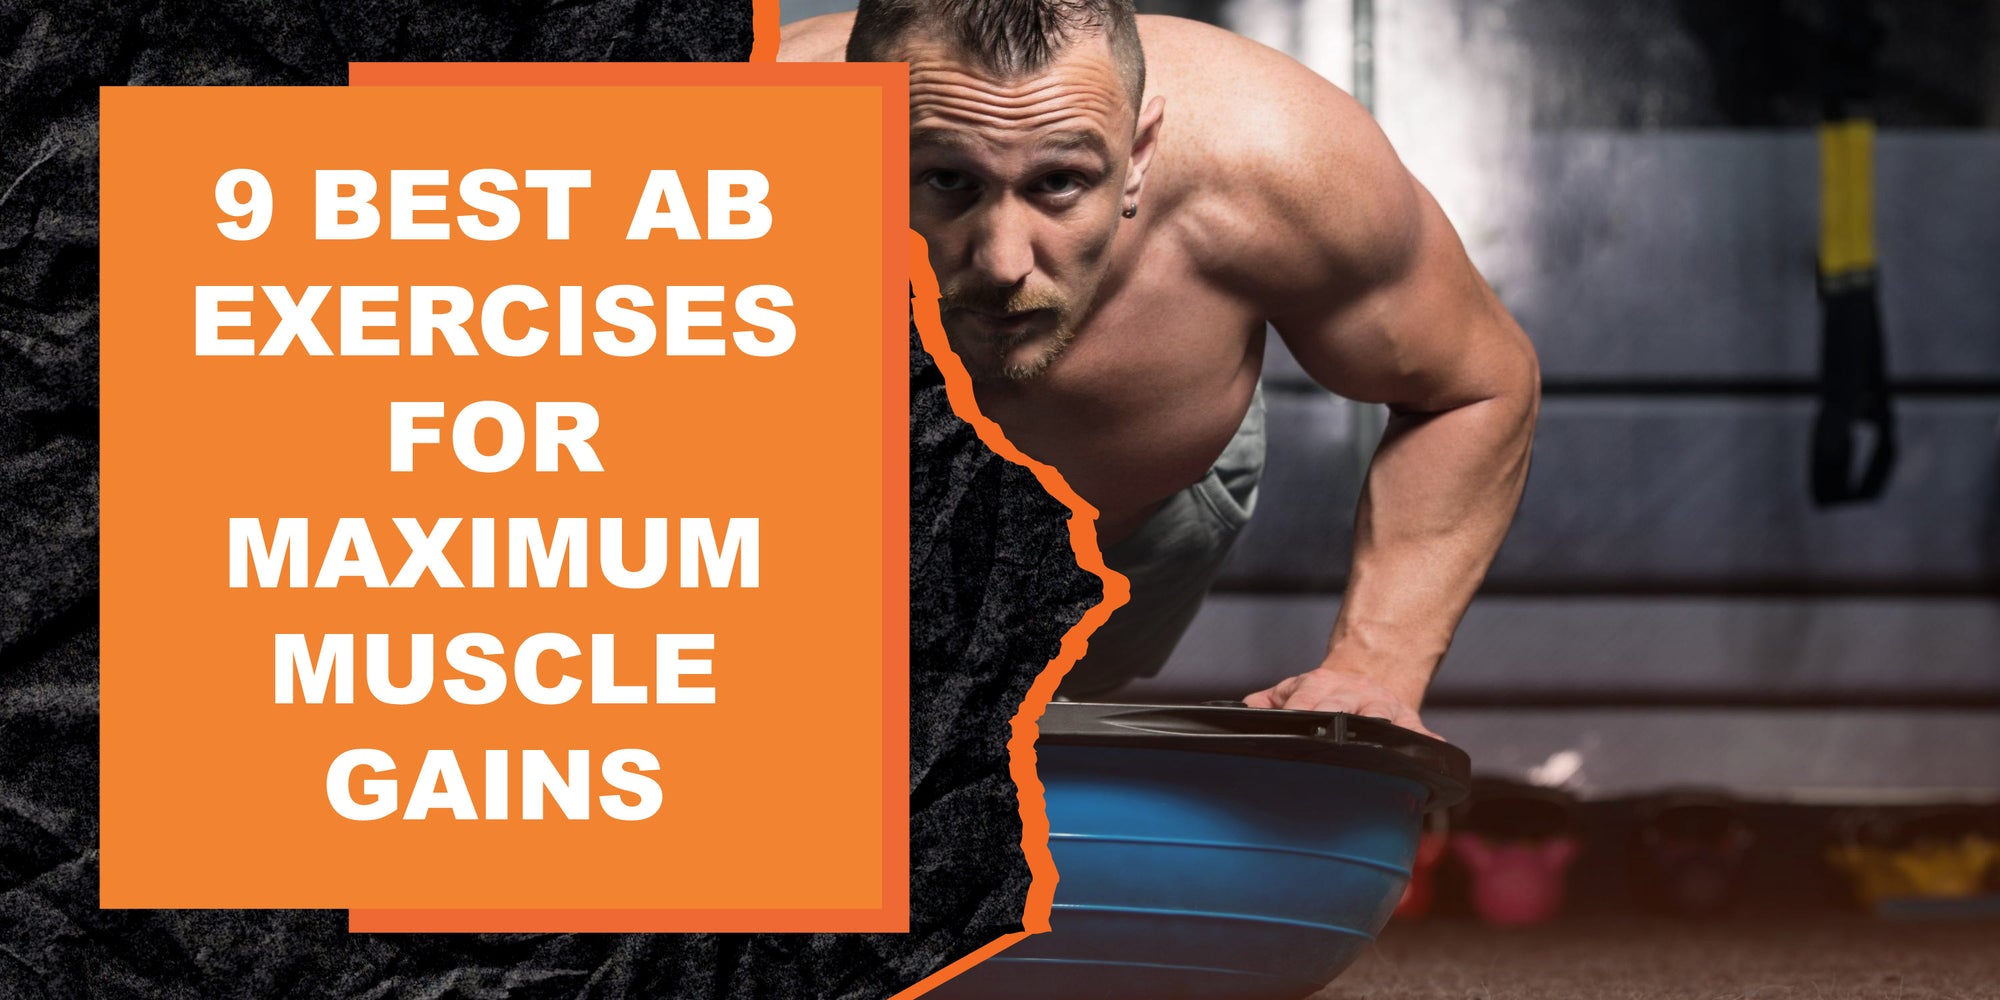 9 Best Ab Exercises for Maximum Muscle Gains